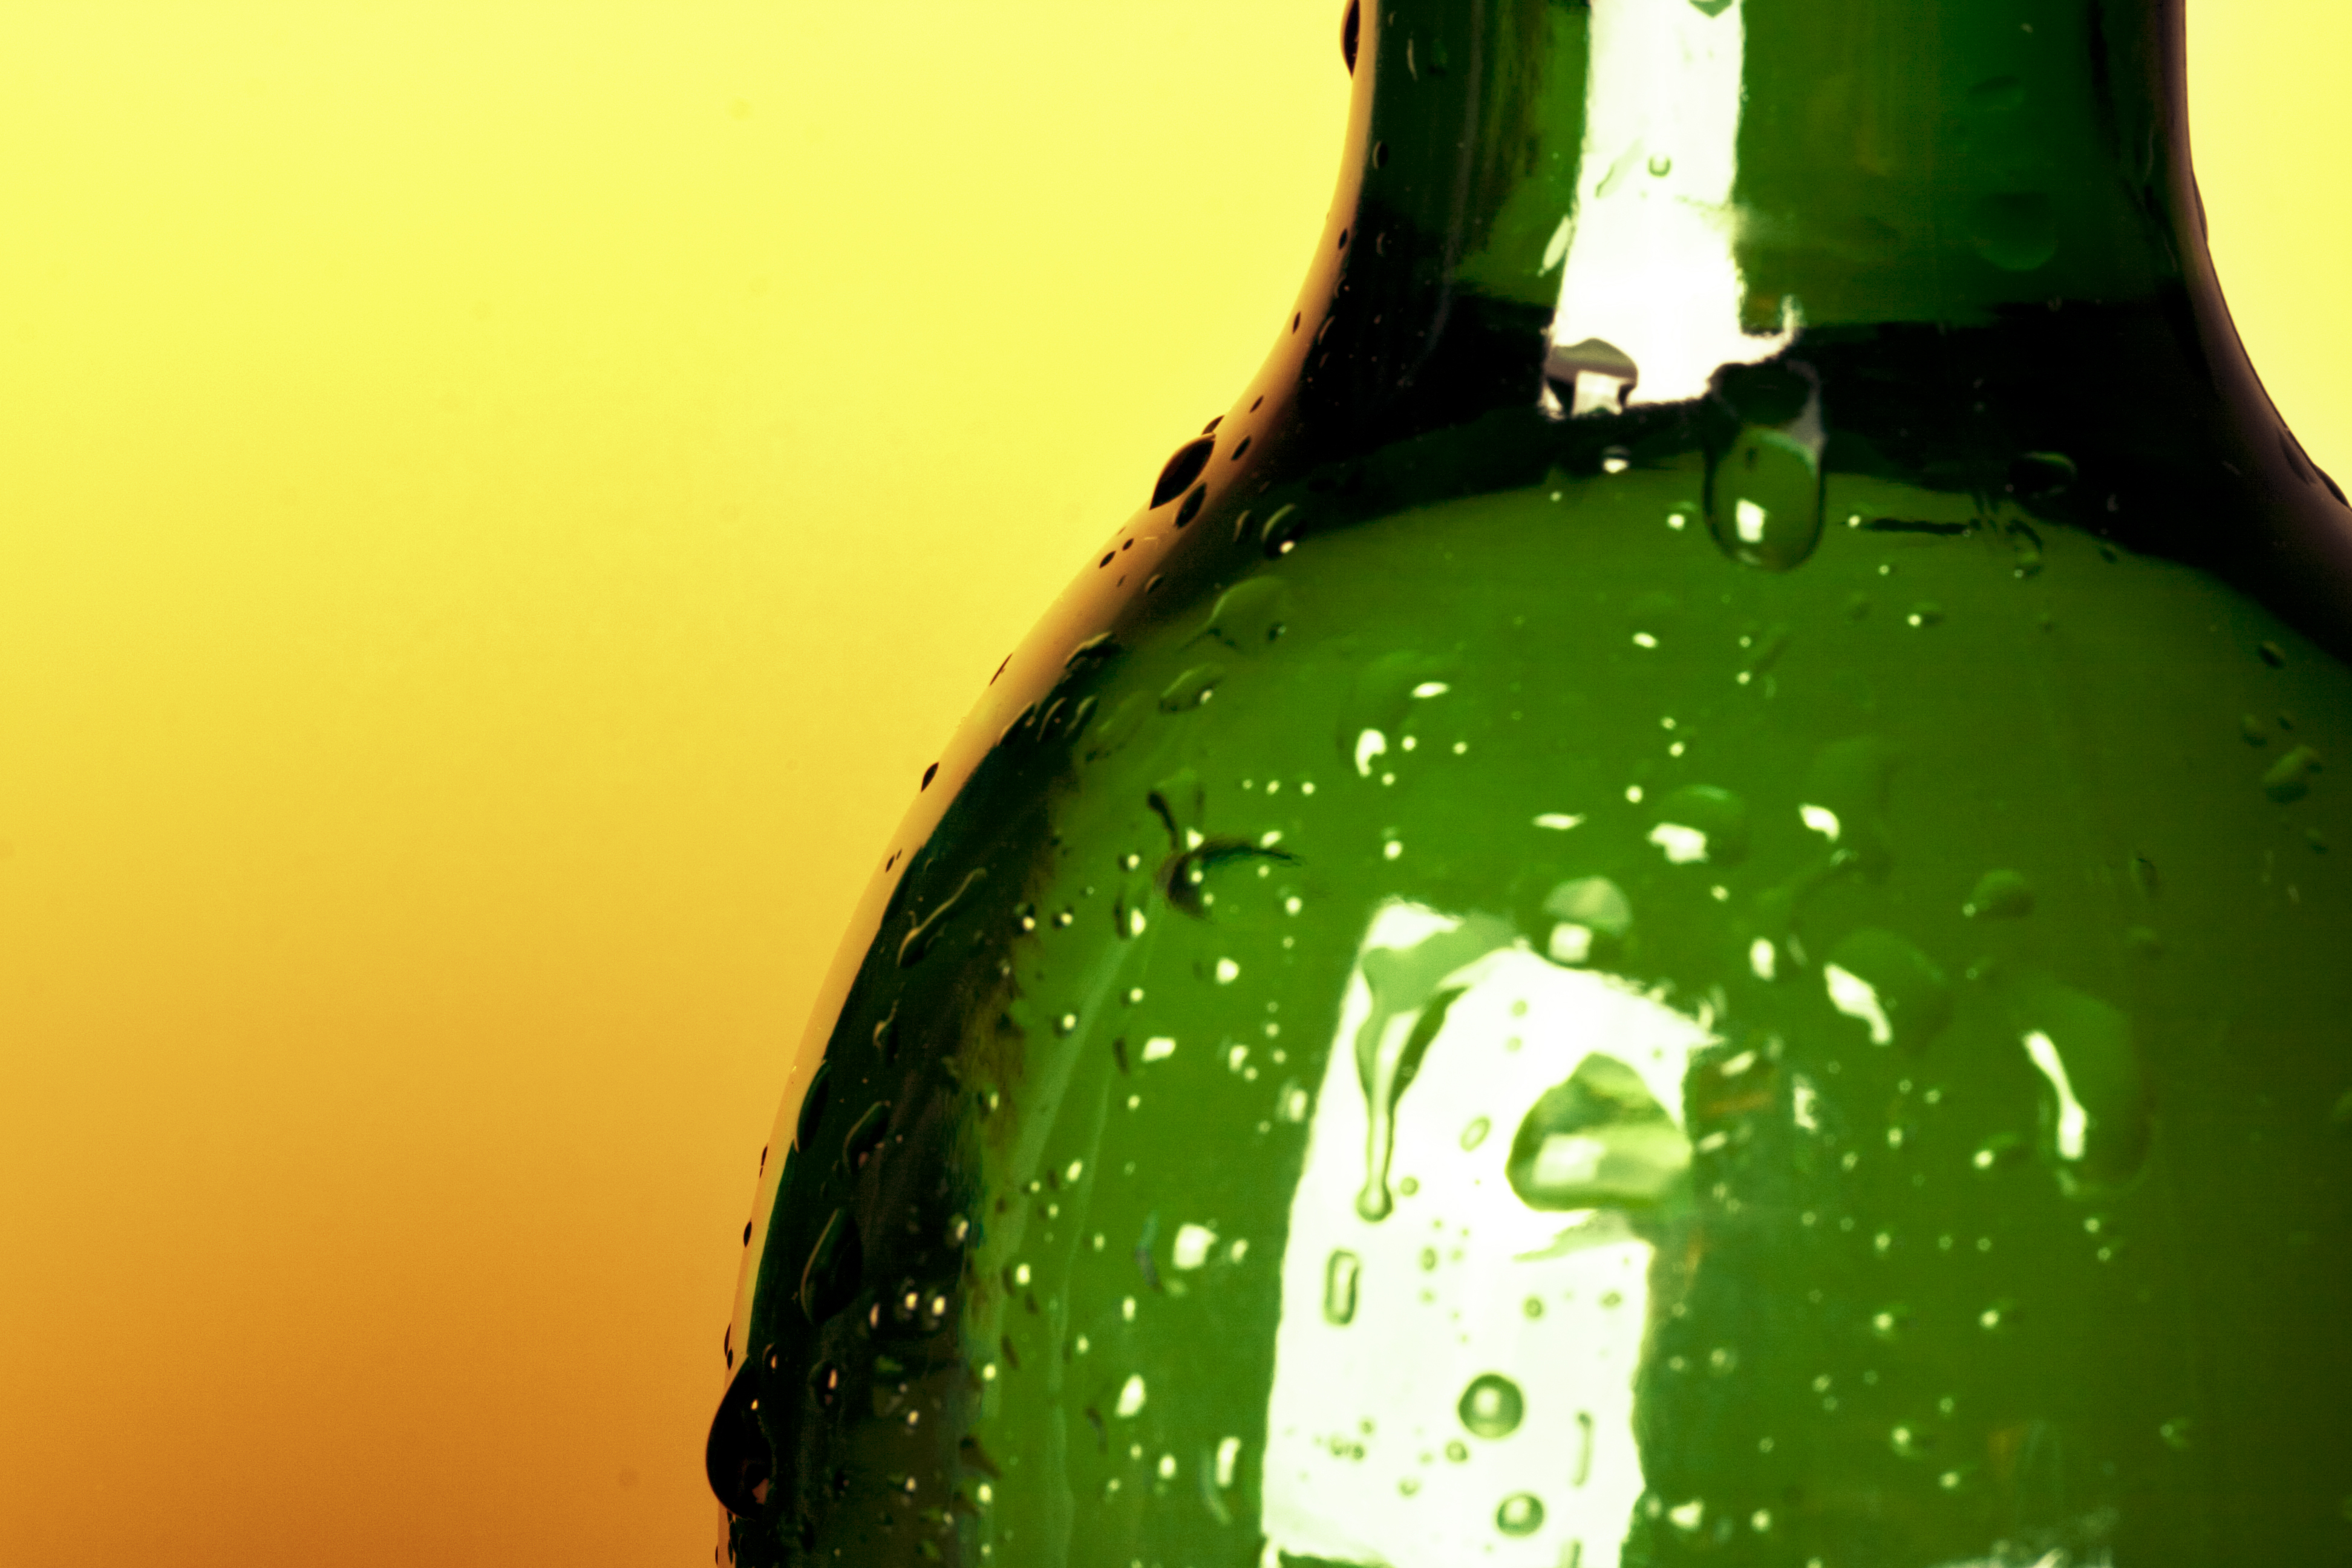 Bottle with water drops photo